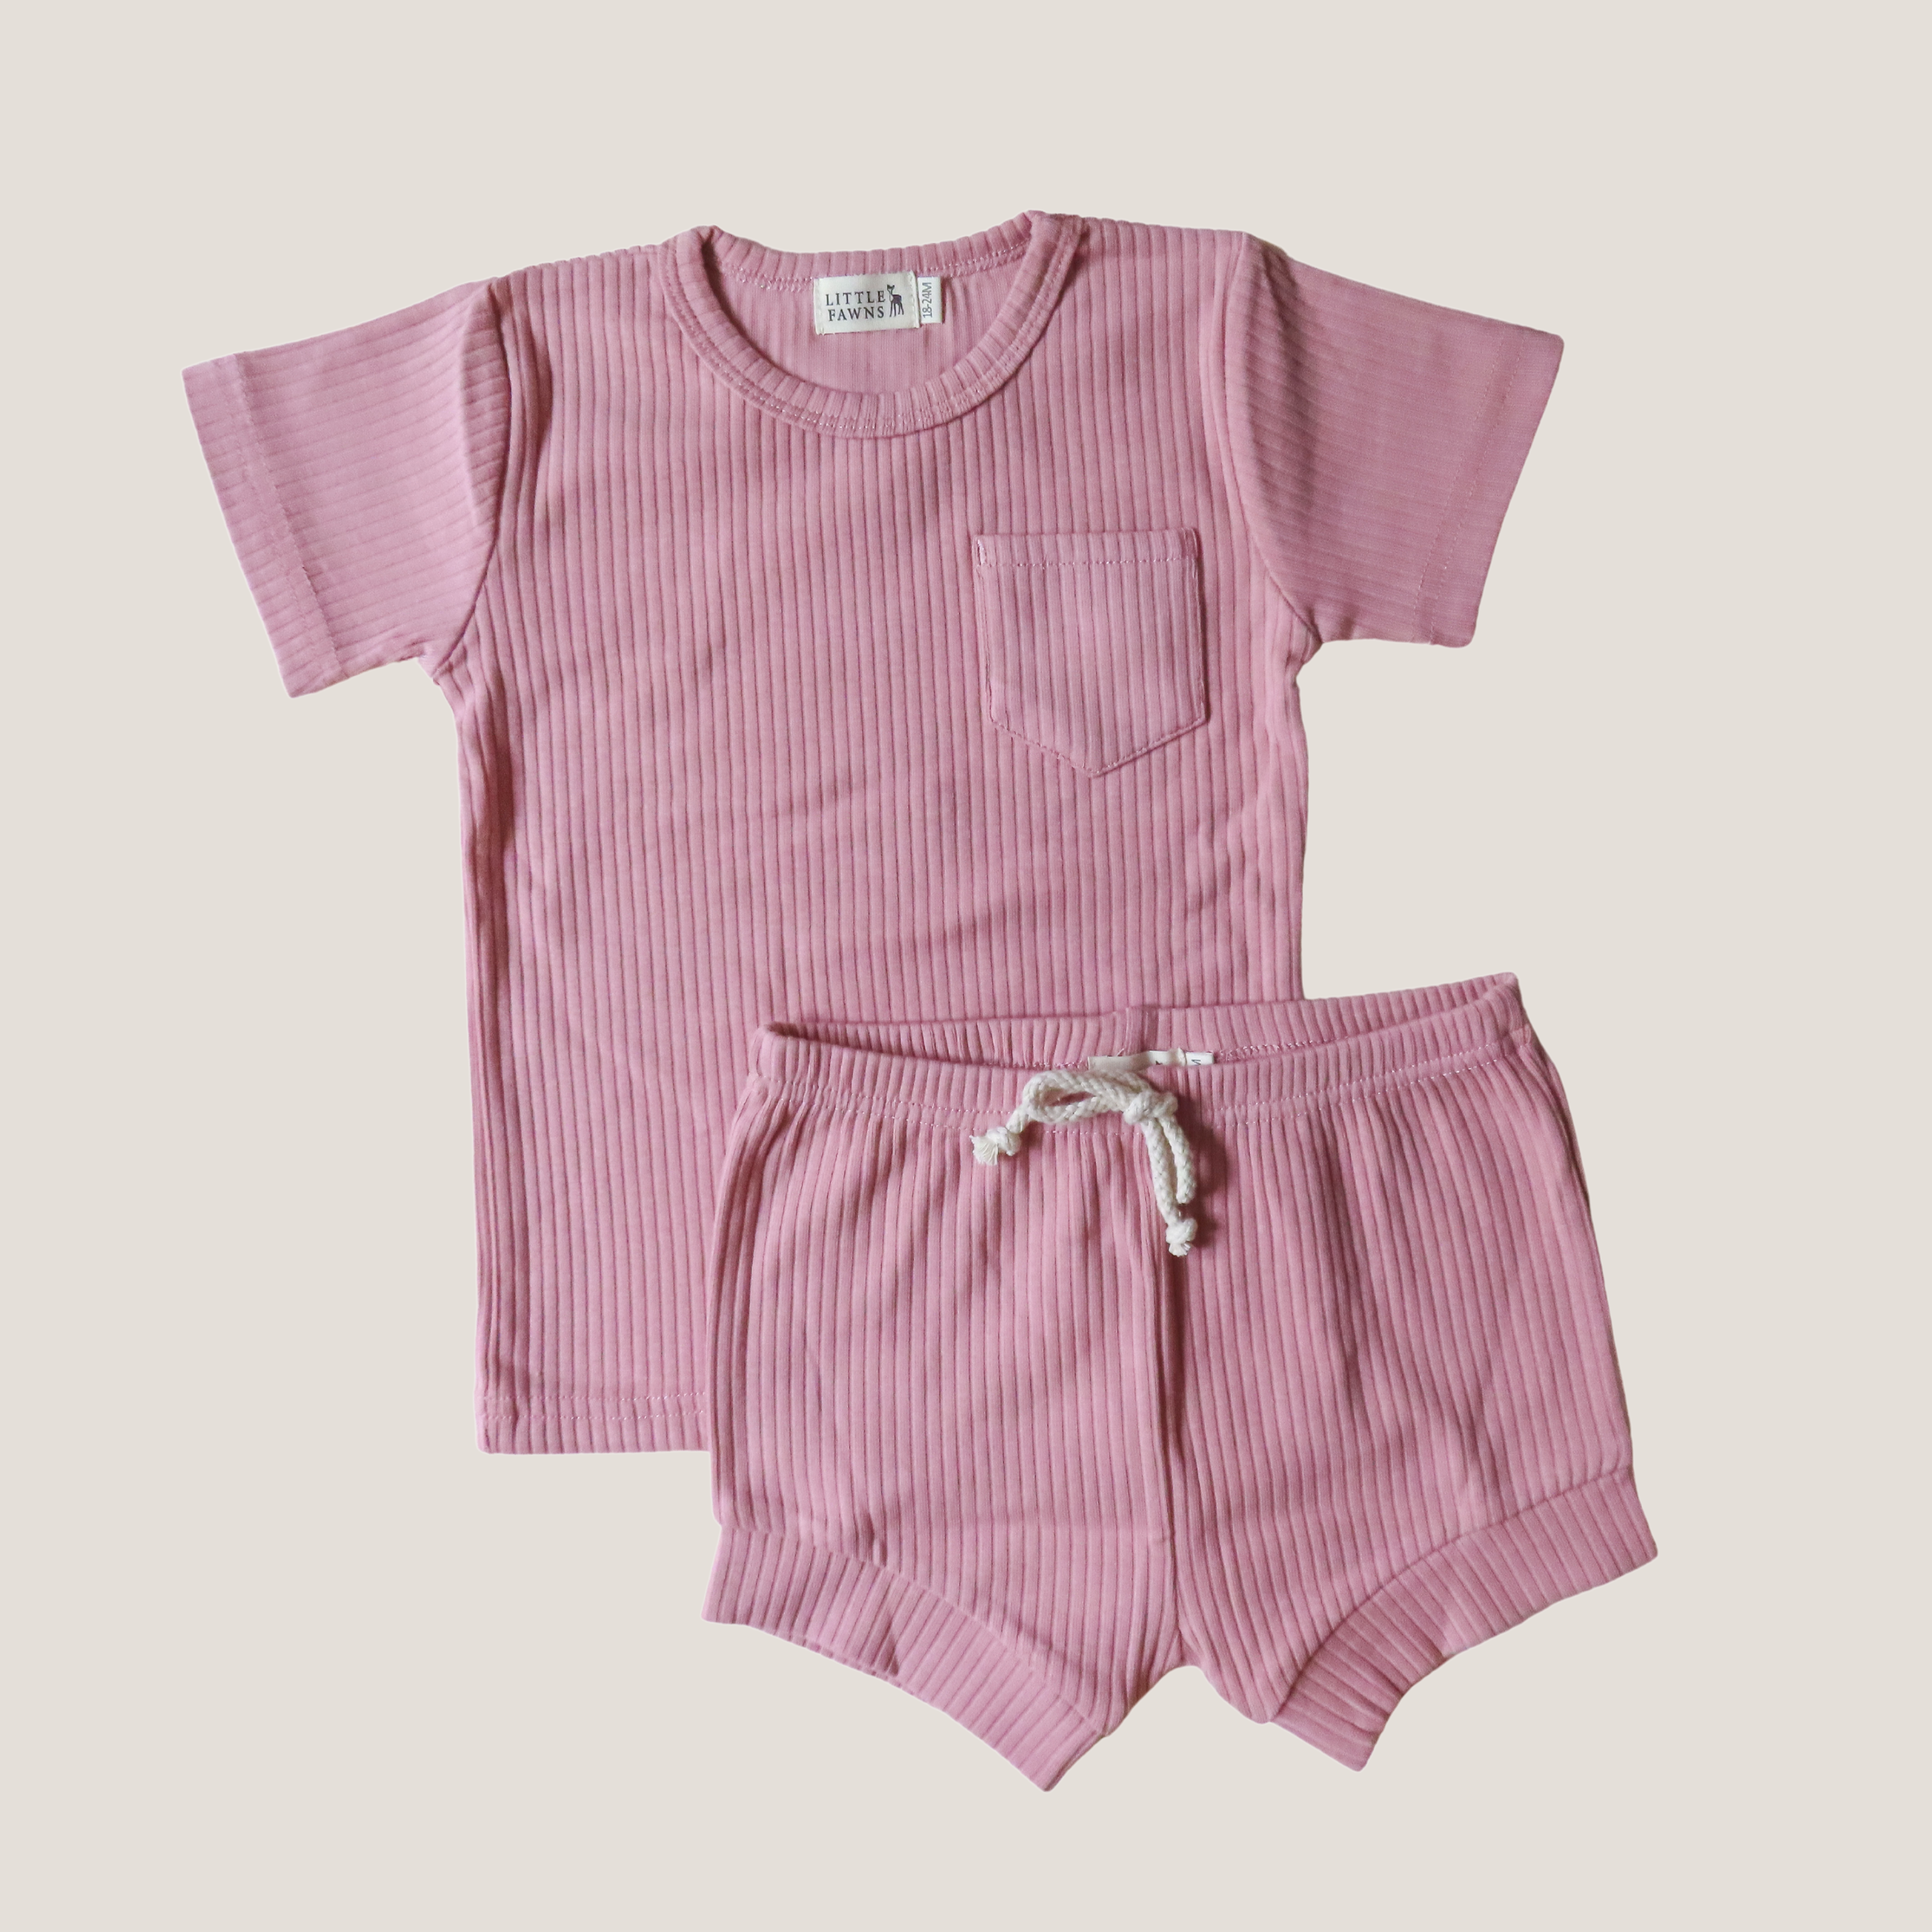 Ribbed Shirt & Short Set in Dusty Pink